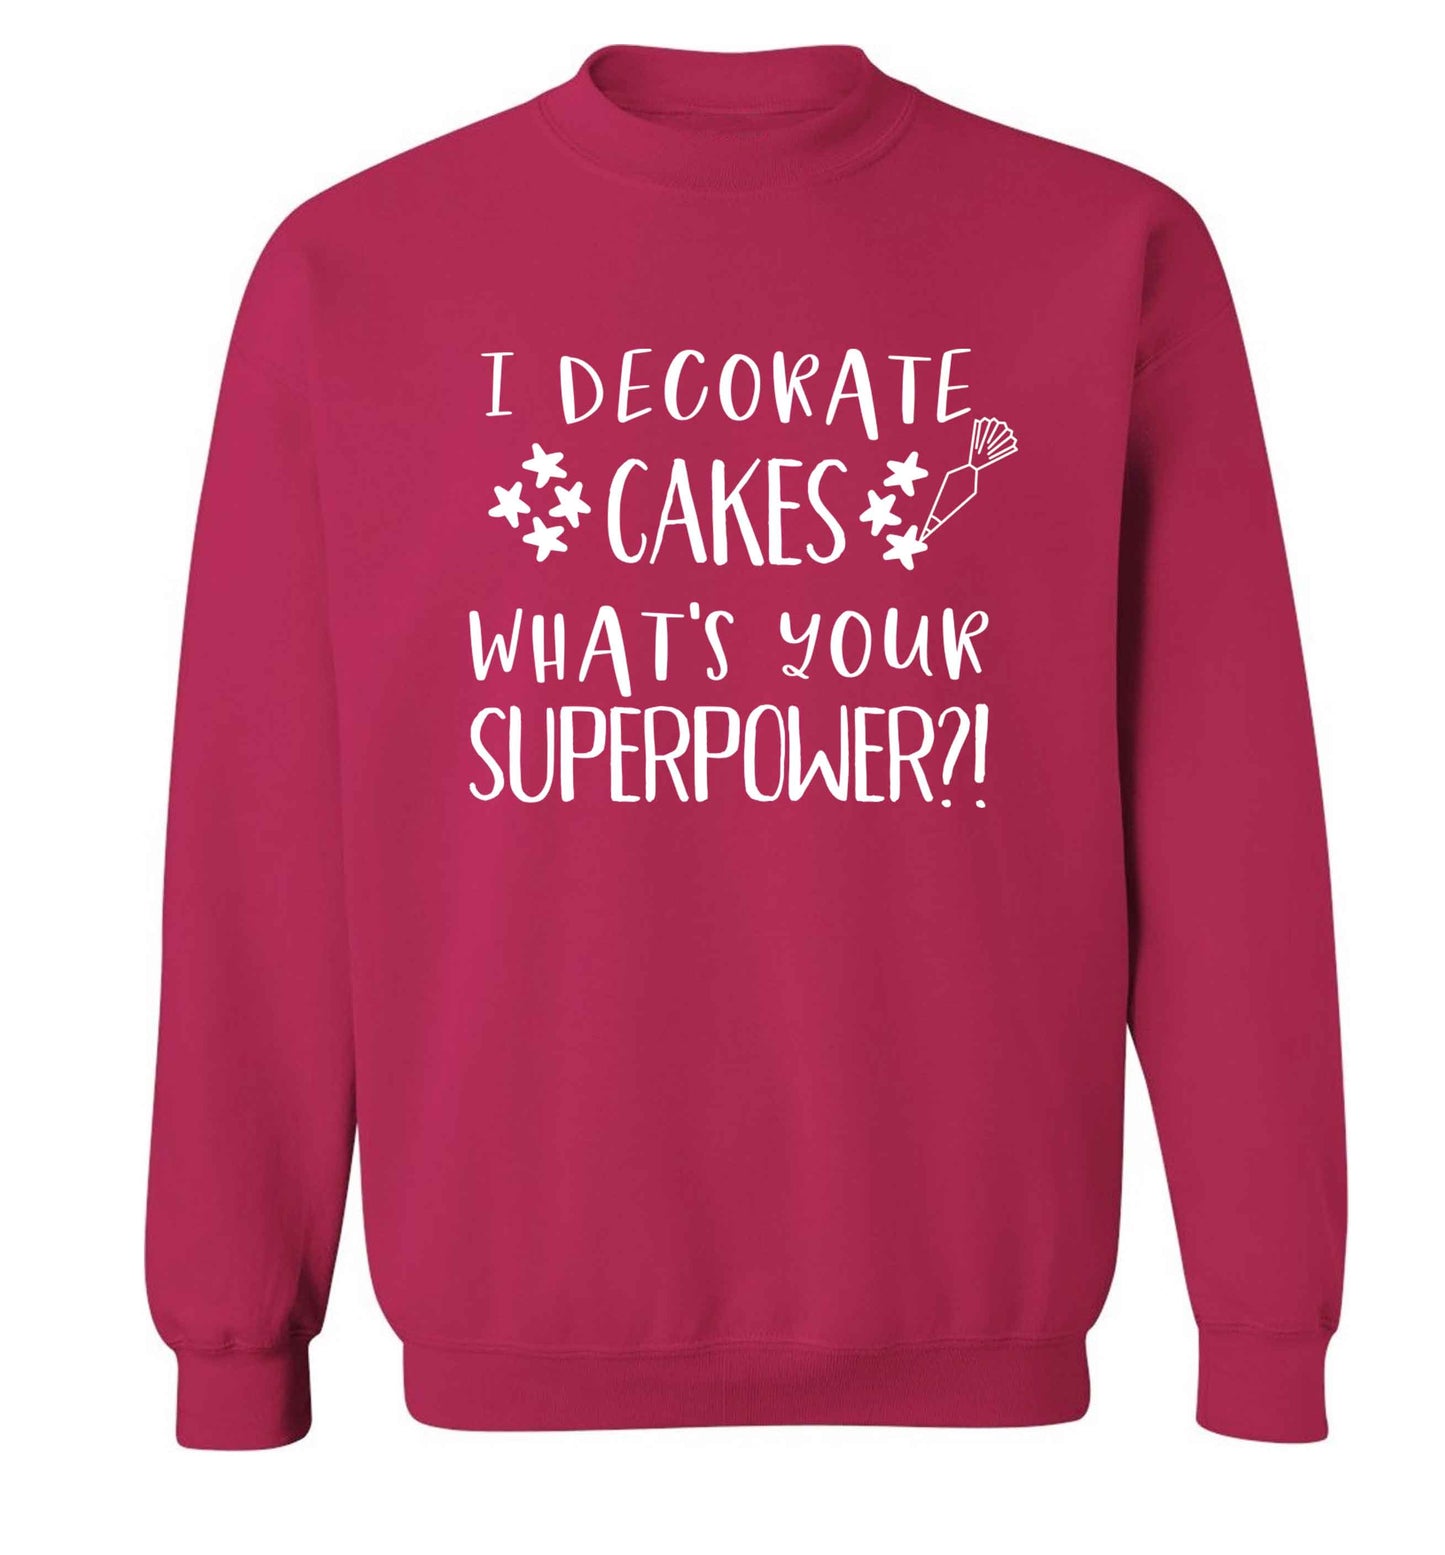 I decorate cakes what's your superpower?! Adult's unisex pink Sweater 2XL